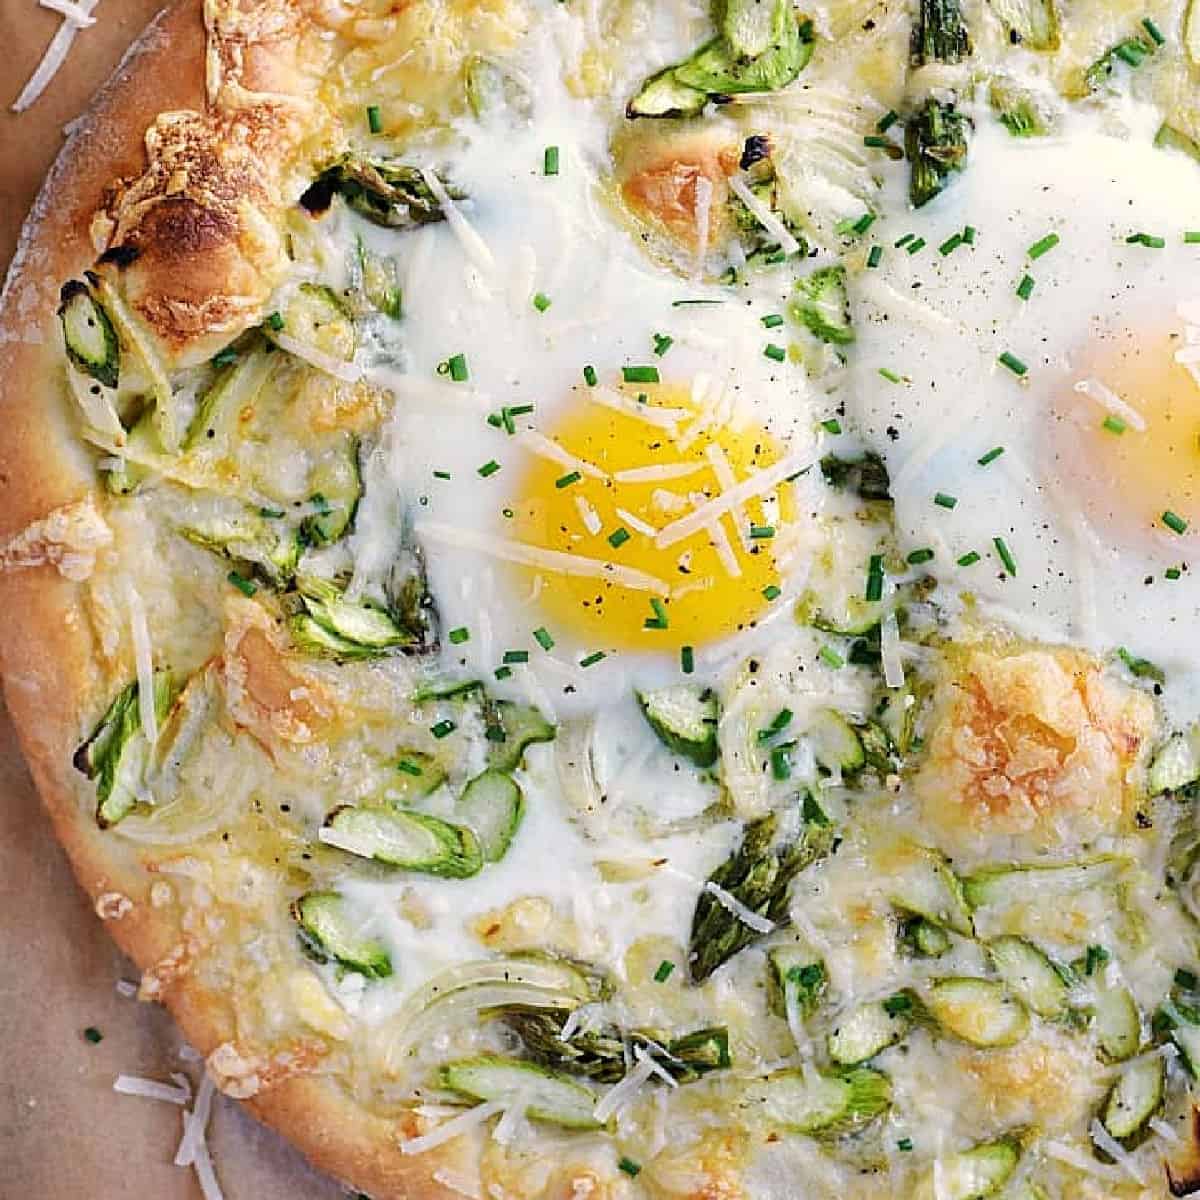 Pizza crust topped with asparagus, shredded cheese, and sunny side up eggs.